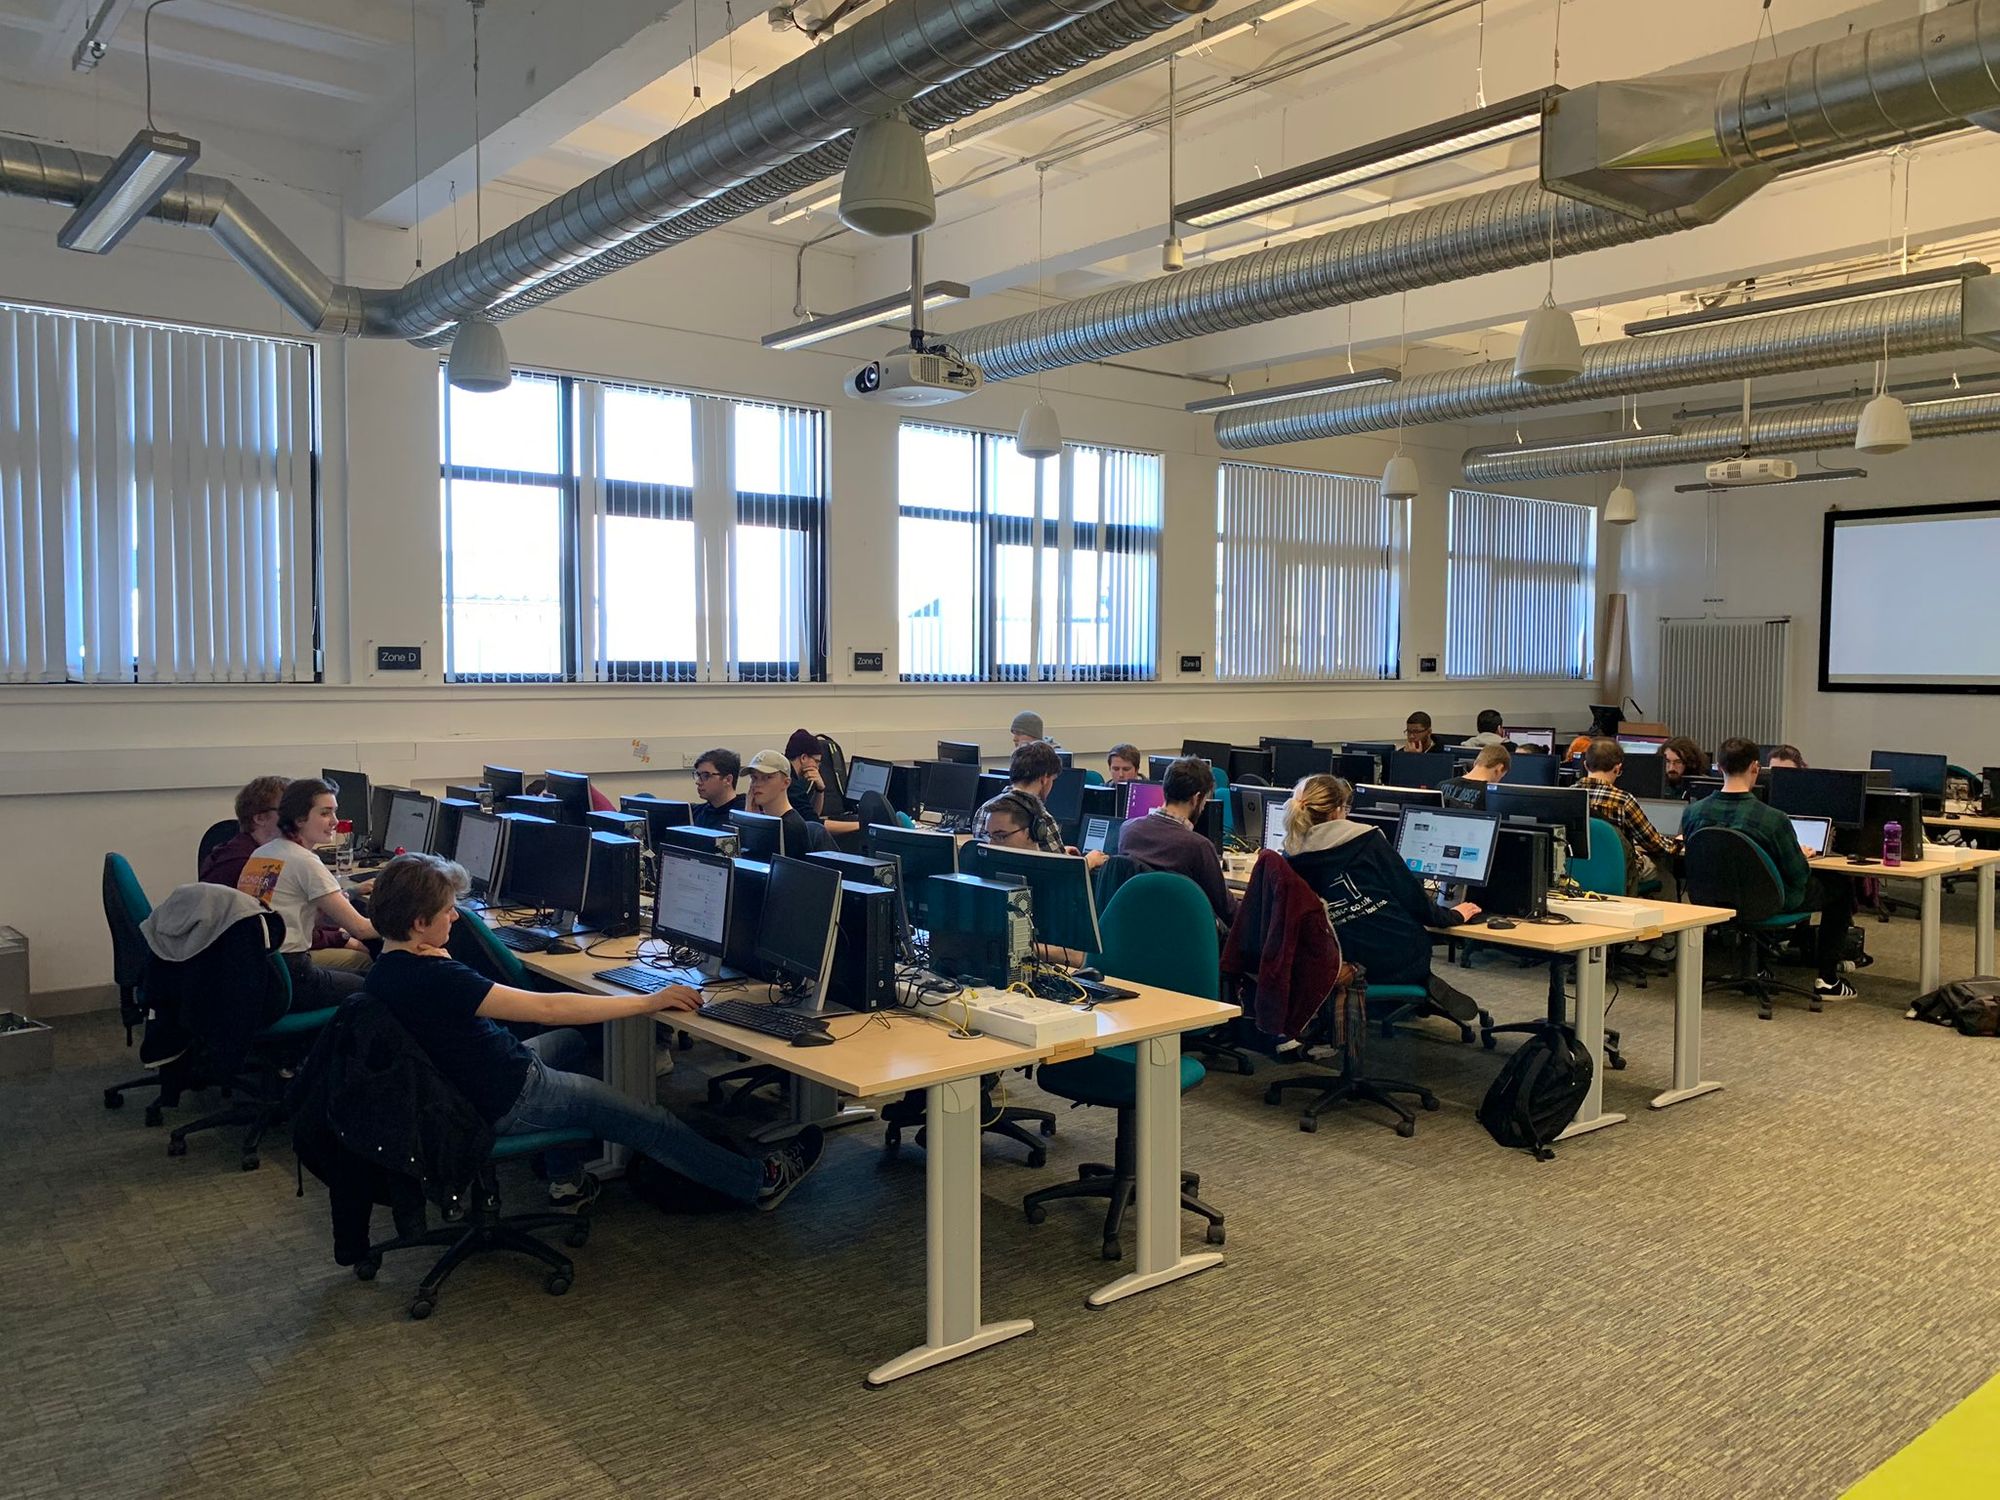 Room full of students sat at computers learning cyber security 